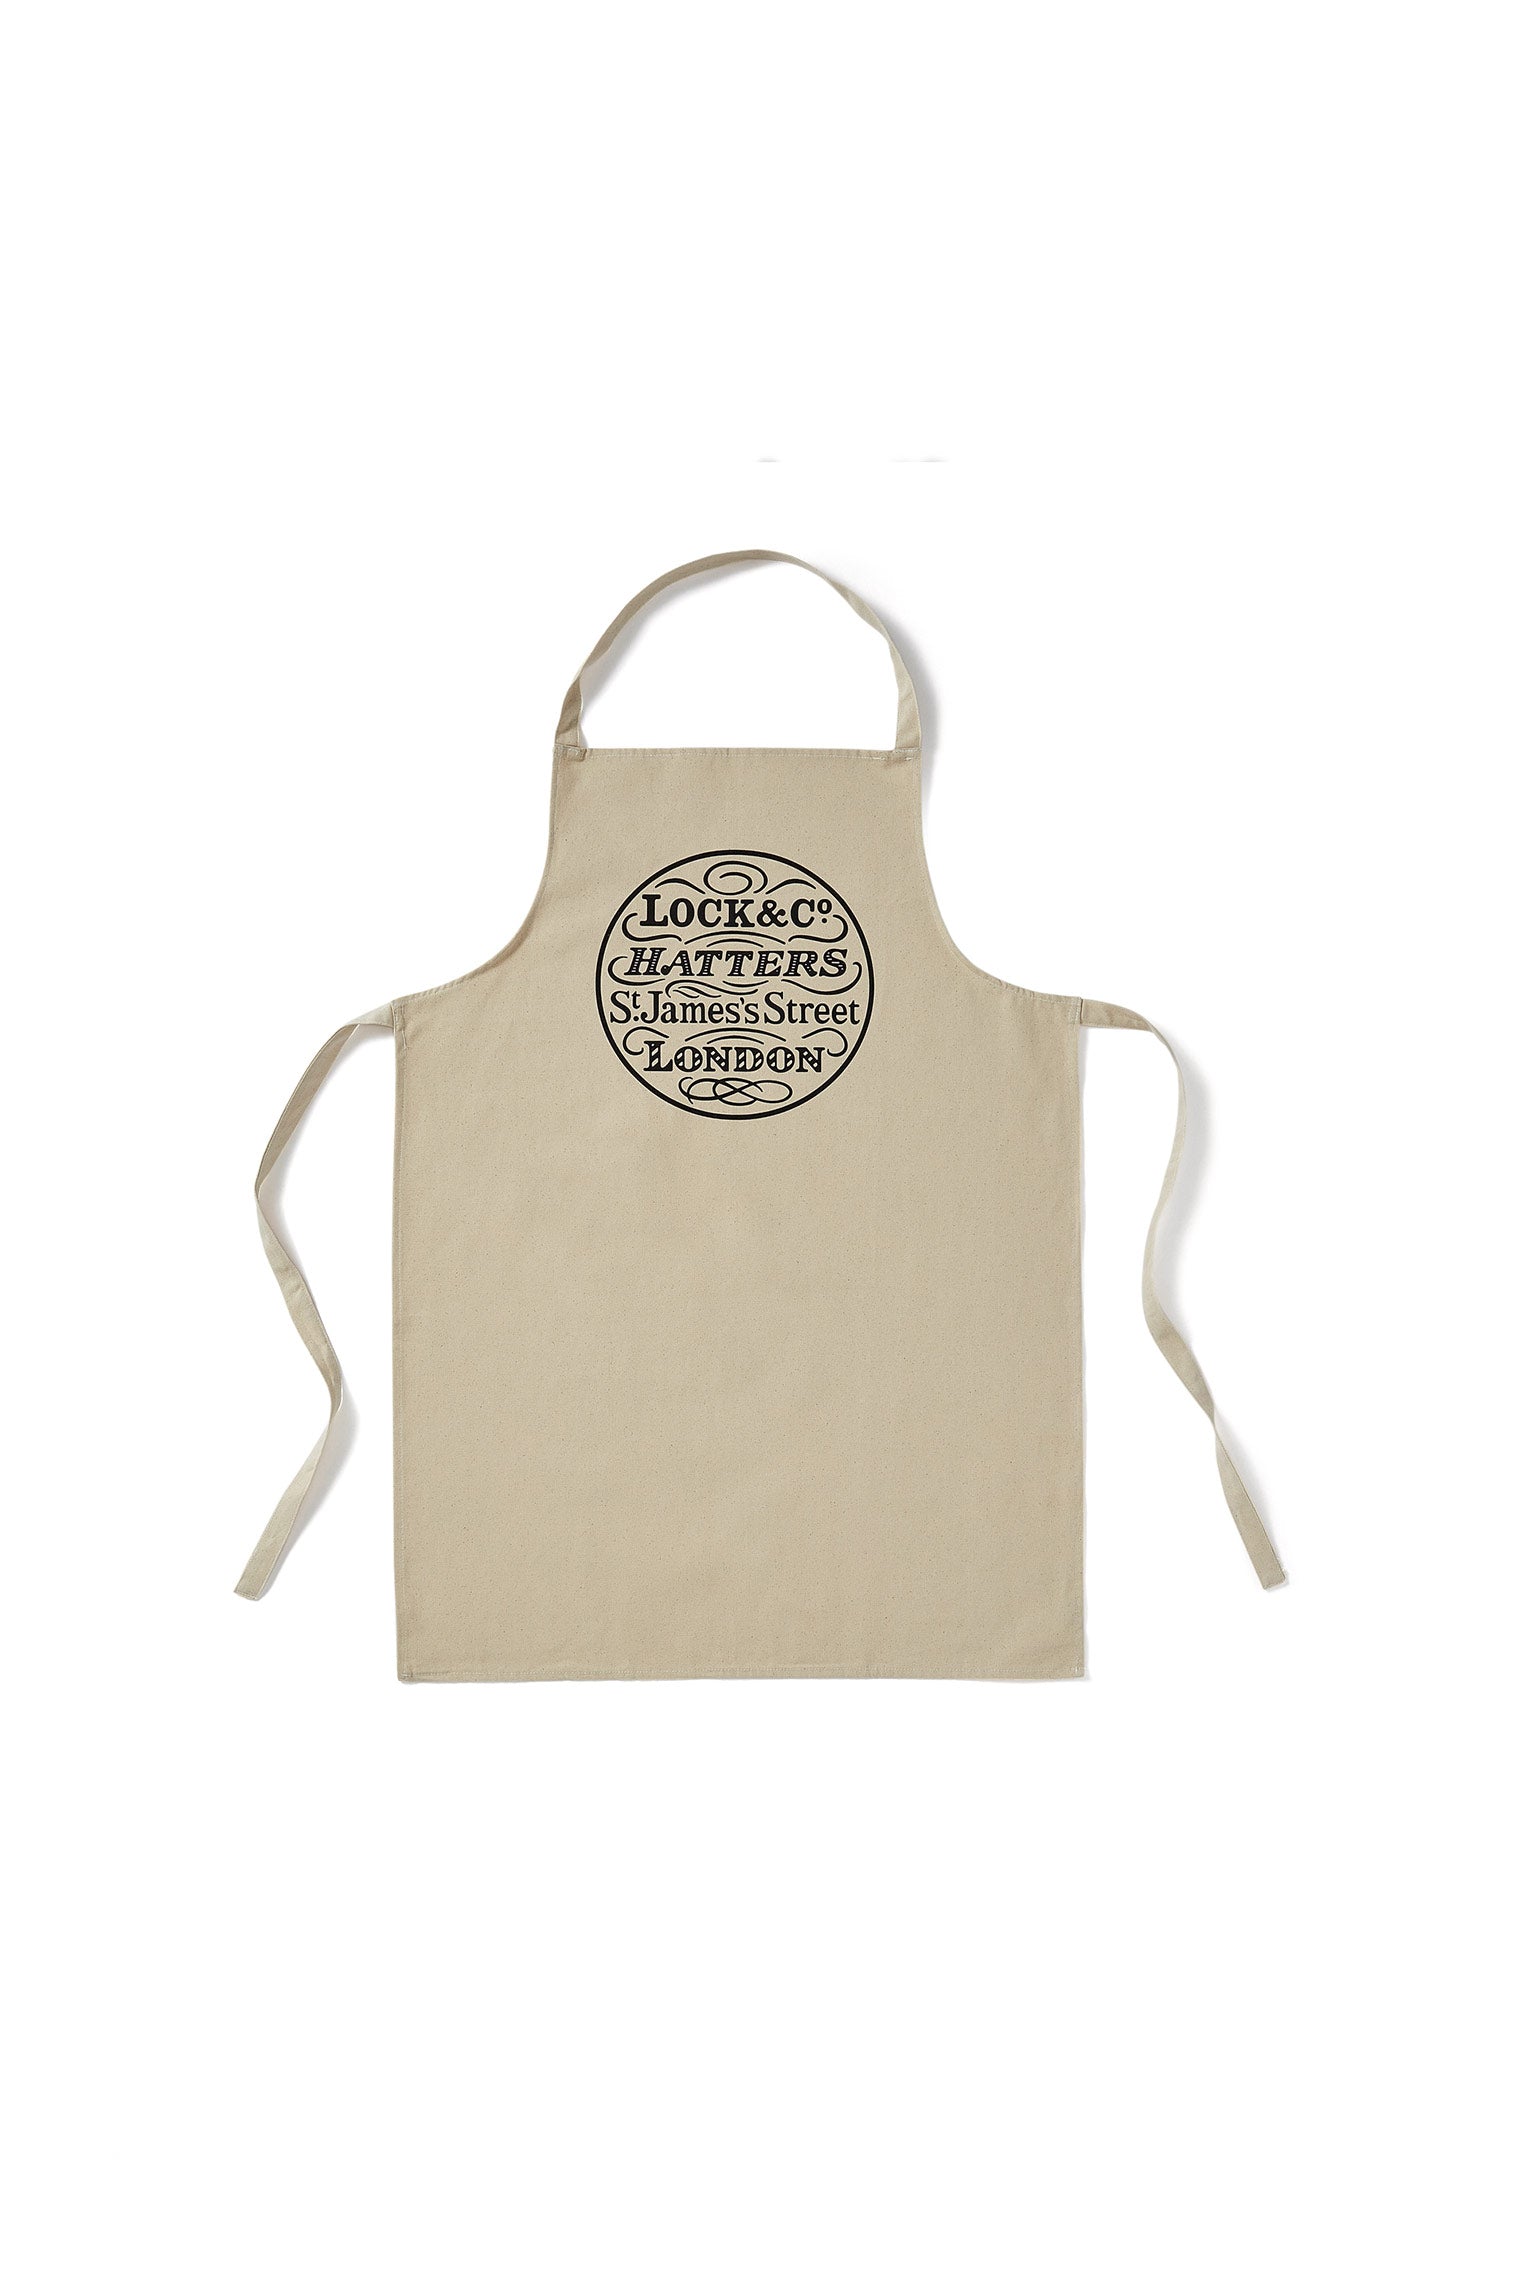 Organic Cotton-Canvas Apron - Valentines Day Gift Ideas - Lock & Co. Hatters London UK